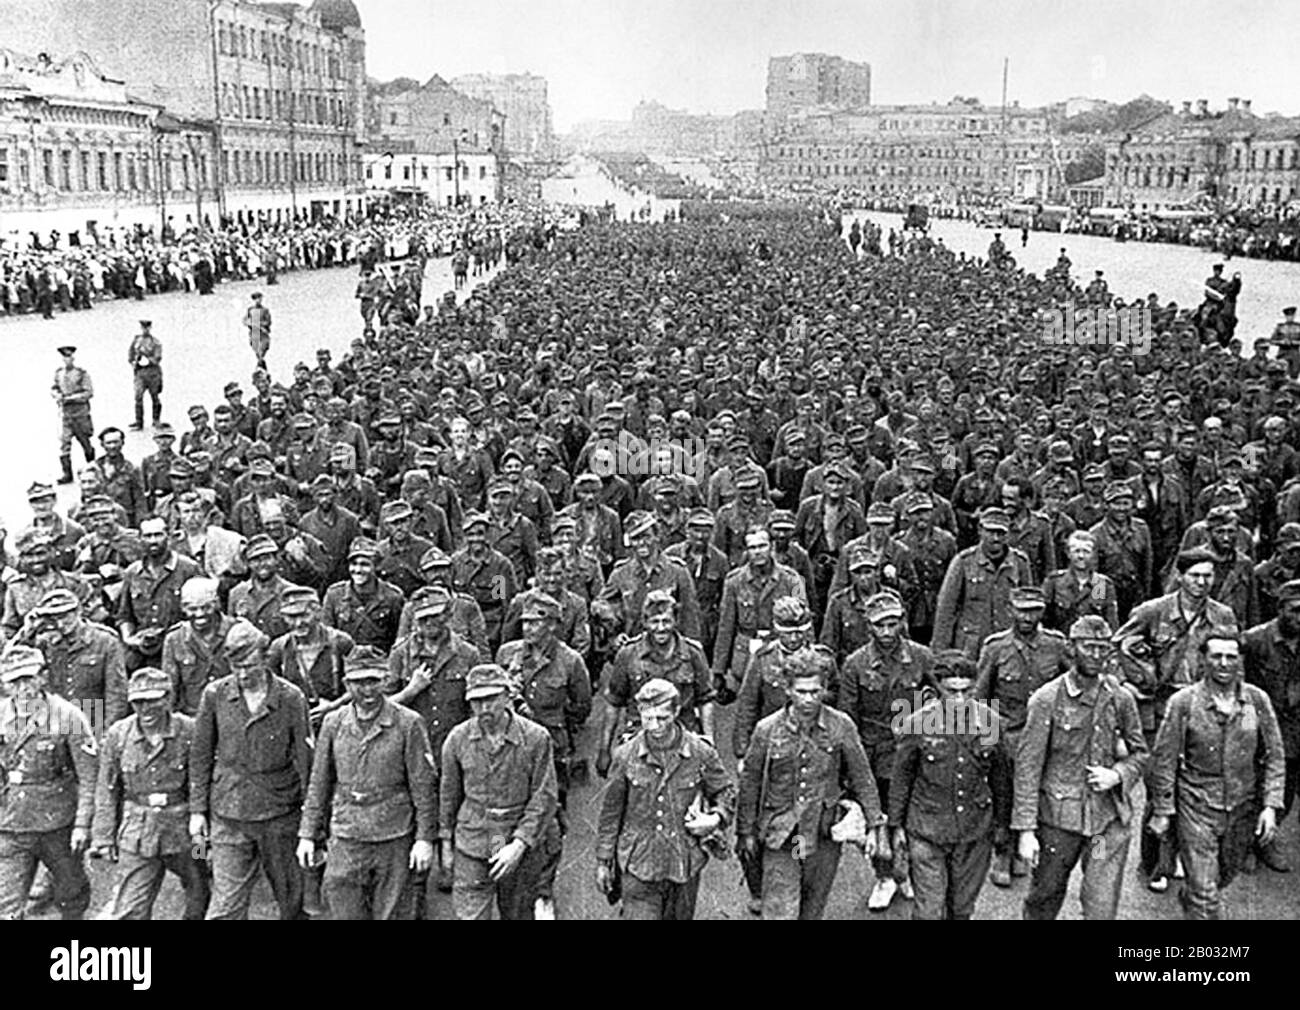 The Battle of Stalingrad (23 August 1942 – 2 February 1943) was a major battle on the Eastern Front of World War II in which Nazi Germany and its allies fought the Soviet Union for control of the city of Stalingrad (now Volgograd) in Southern Russia, near the eastern boundary of Europe.  Marked by constant close quarters combat and direct assaults on civilians by air raids, it is often regarded as one of the single largest (nearly 2.2 million personnel) and bloodiest (1.7–2 million wounded, killed or captured) battles in the history of warfare. The heavy losses inflicted on the German Wehrmach Stock Photo